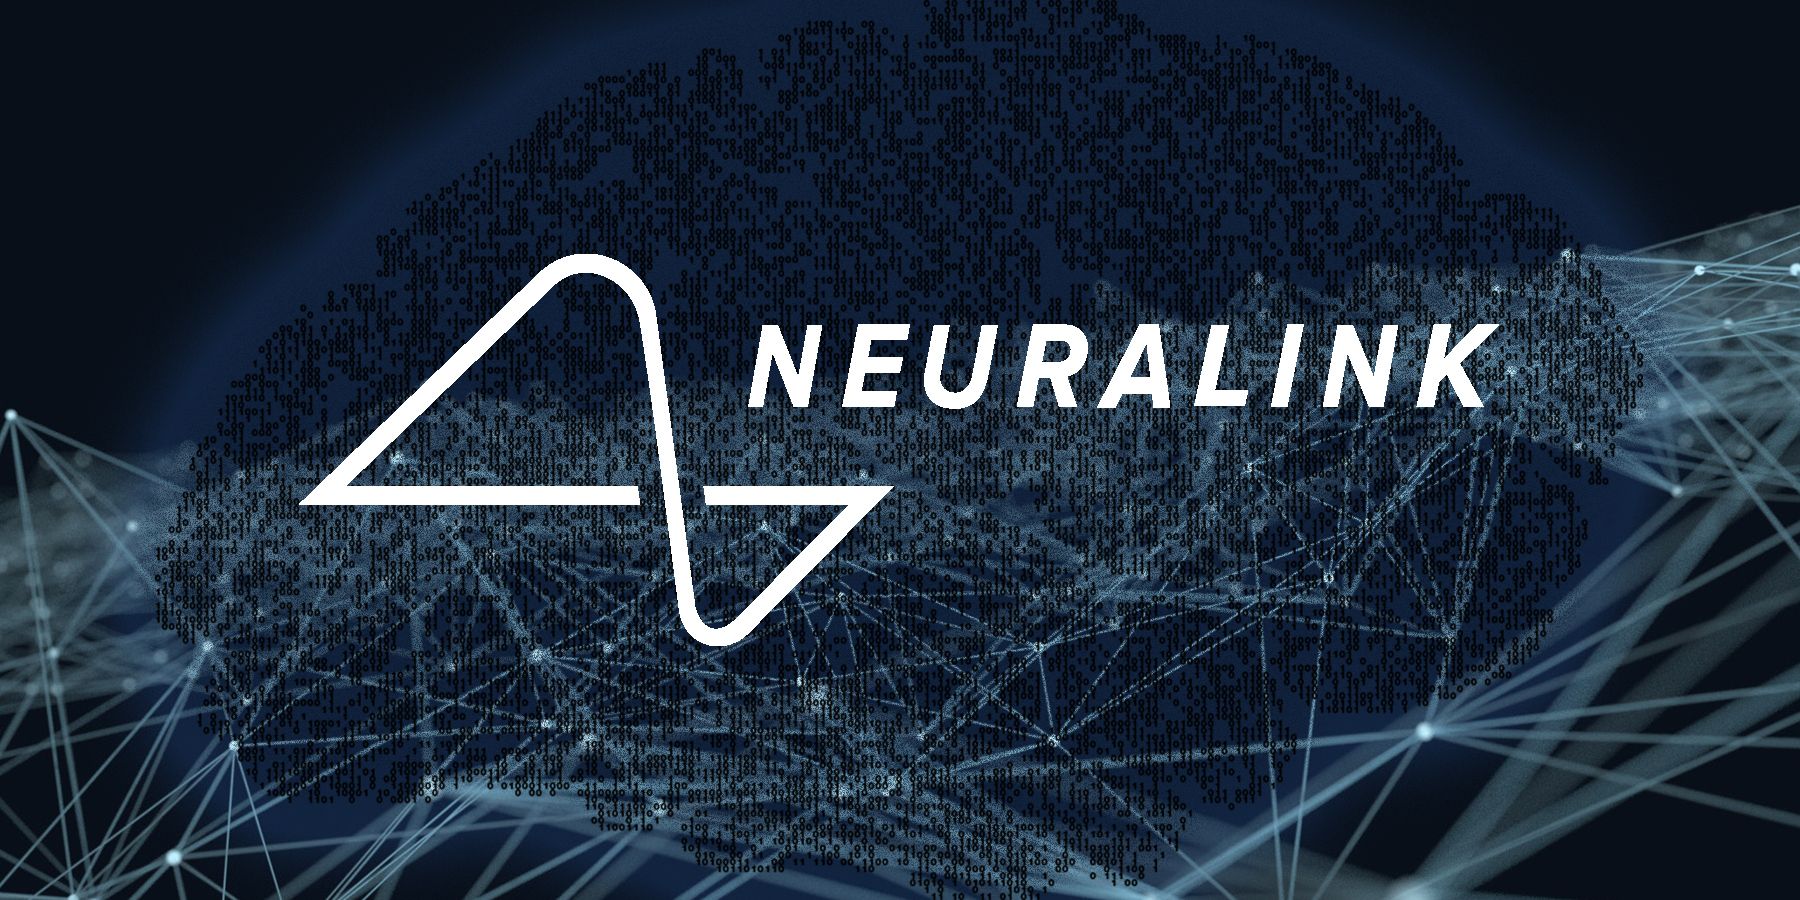 Neuralink Live Demonstration To Take Place This Week, Says Elon Musk